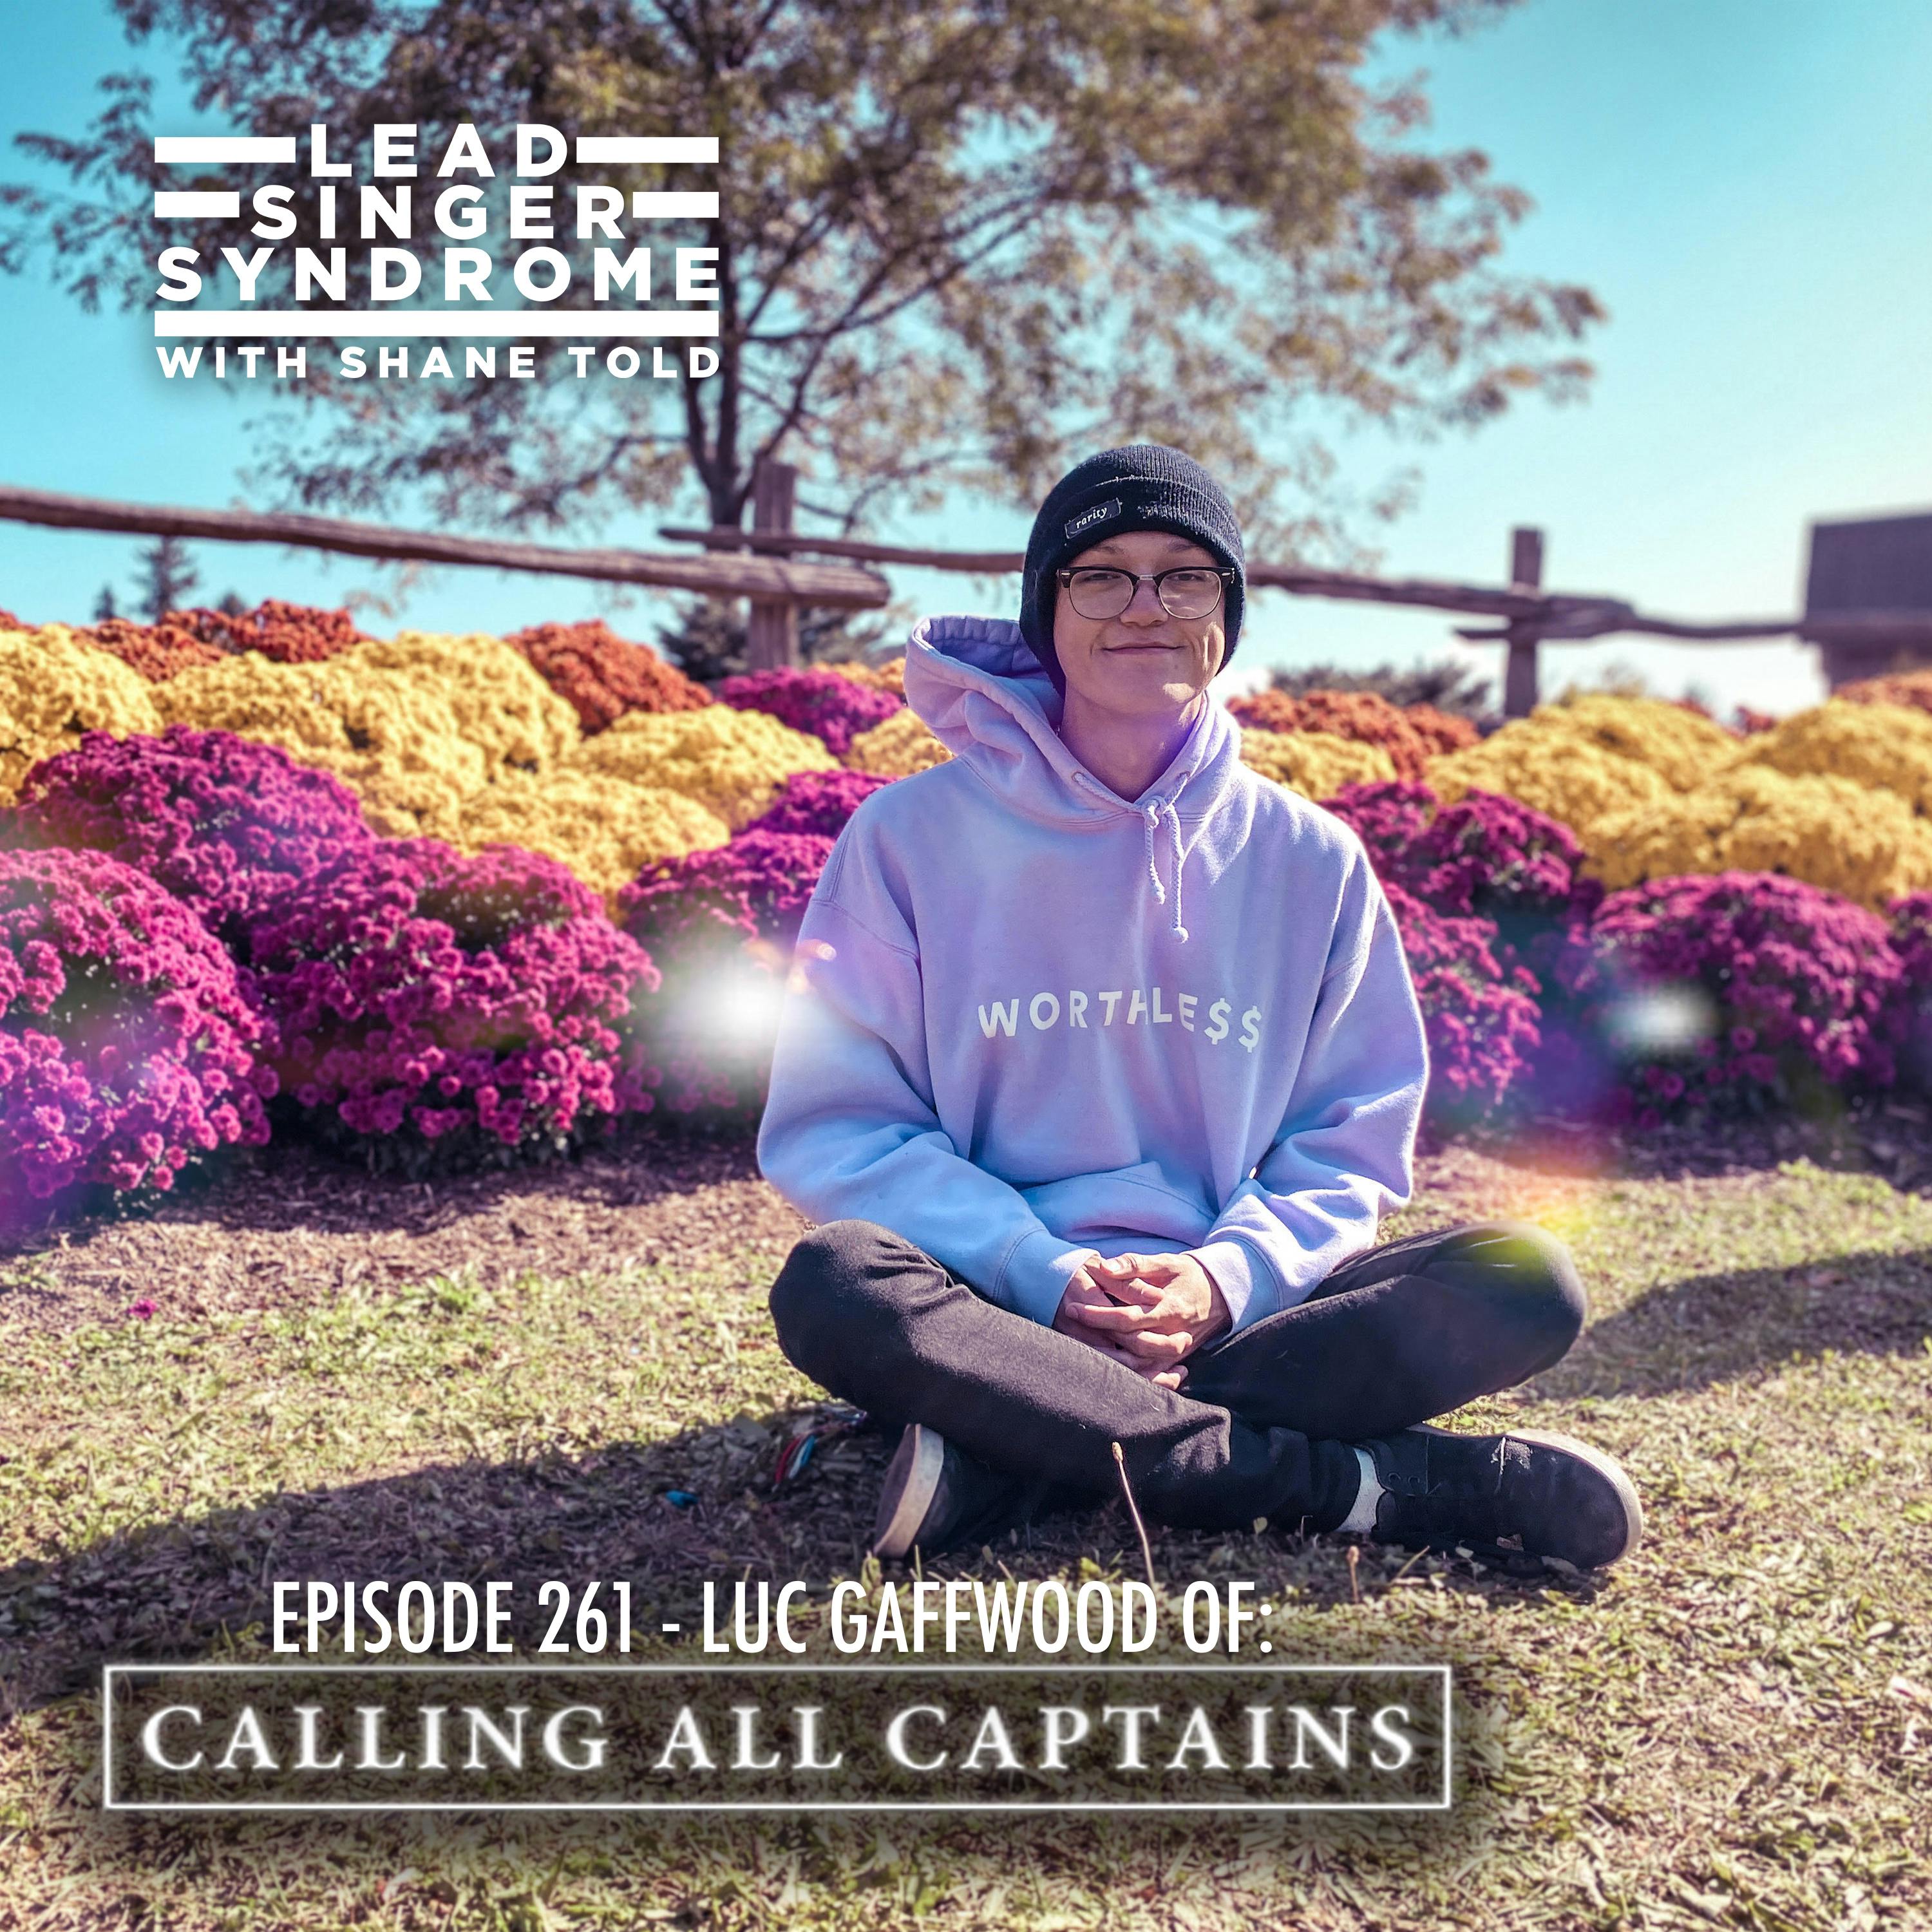 Luc Gaffwood (Calling All Captains)